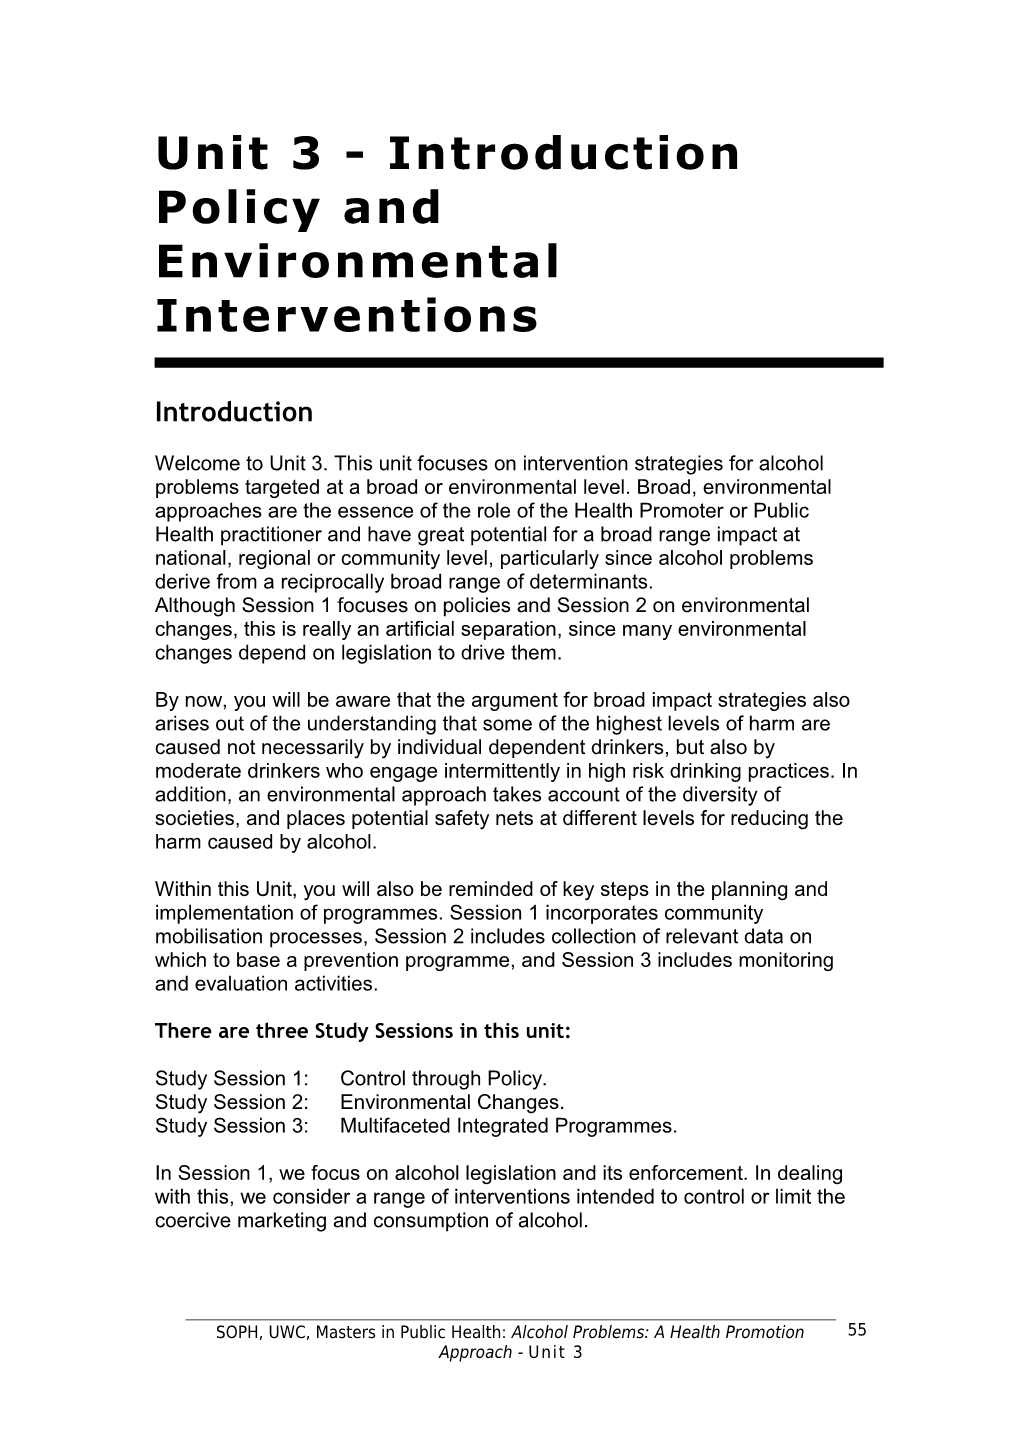 Policy and Environmental Interventions